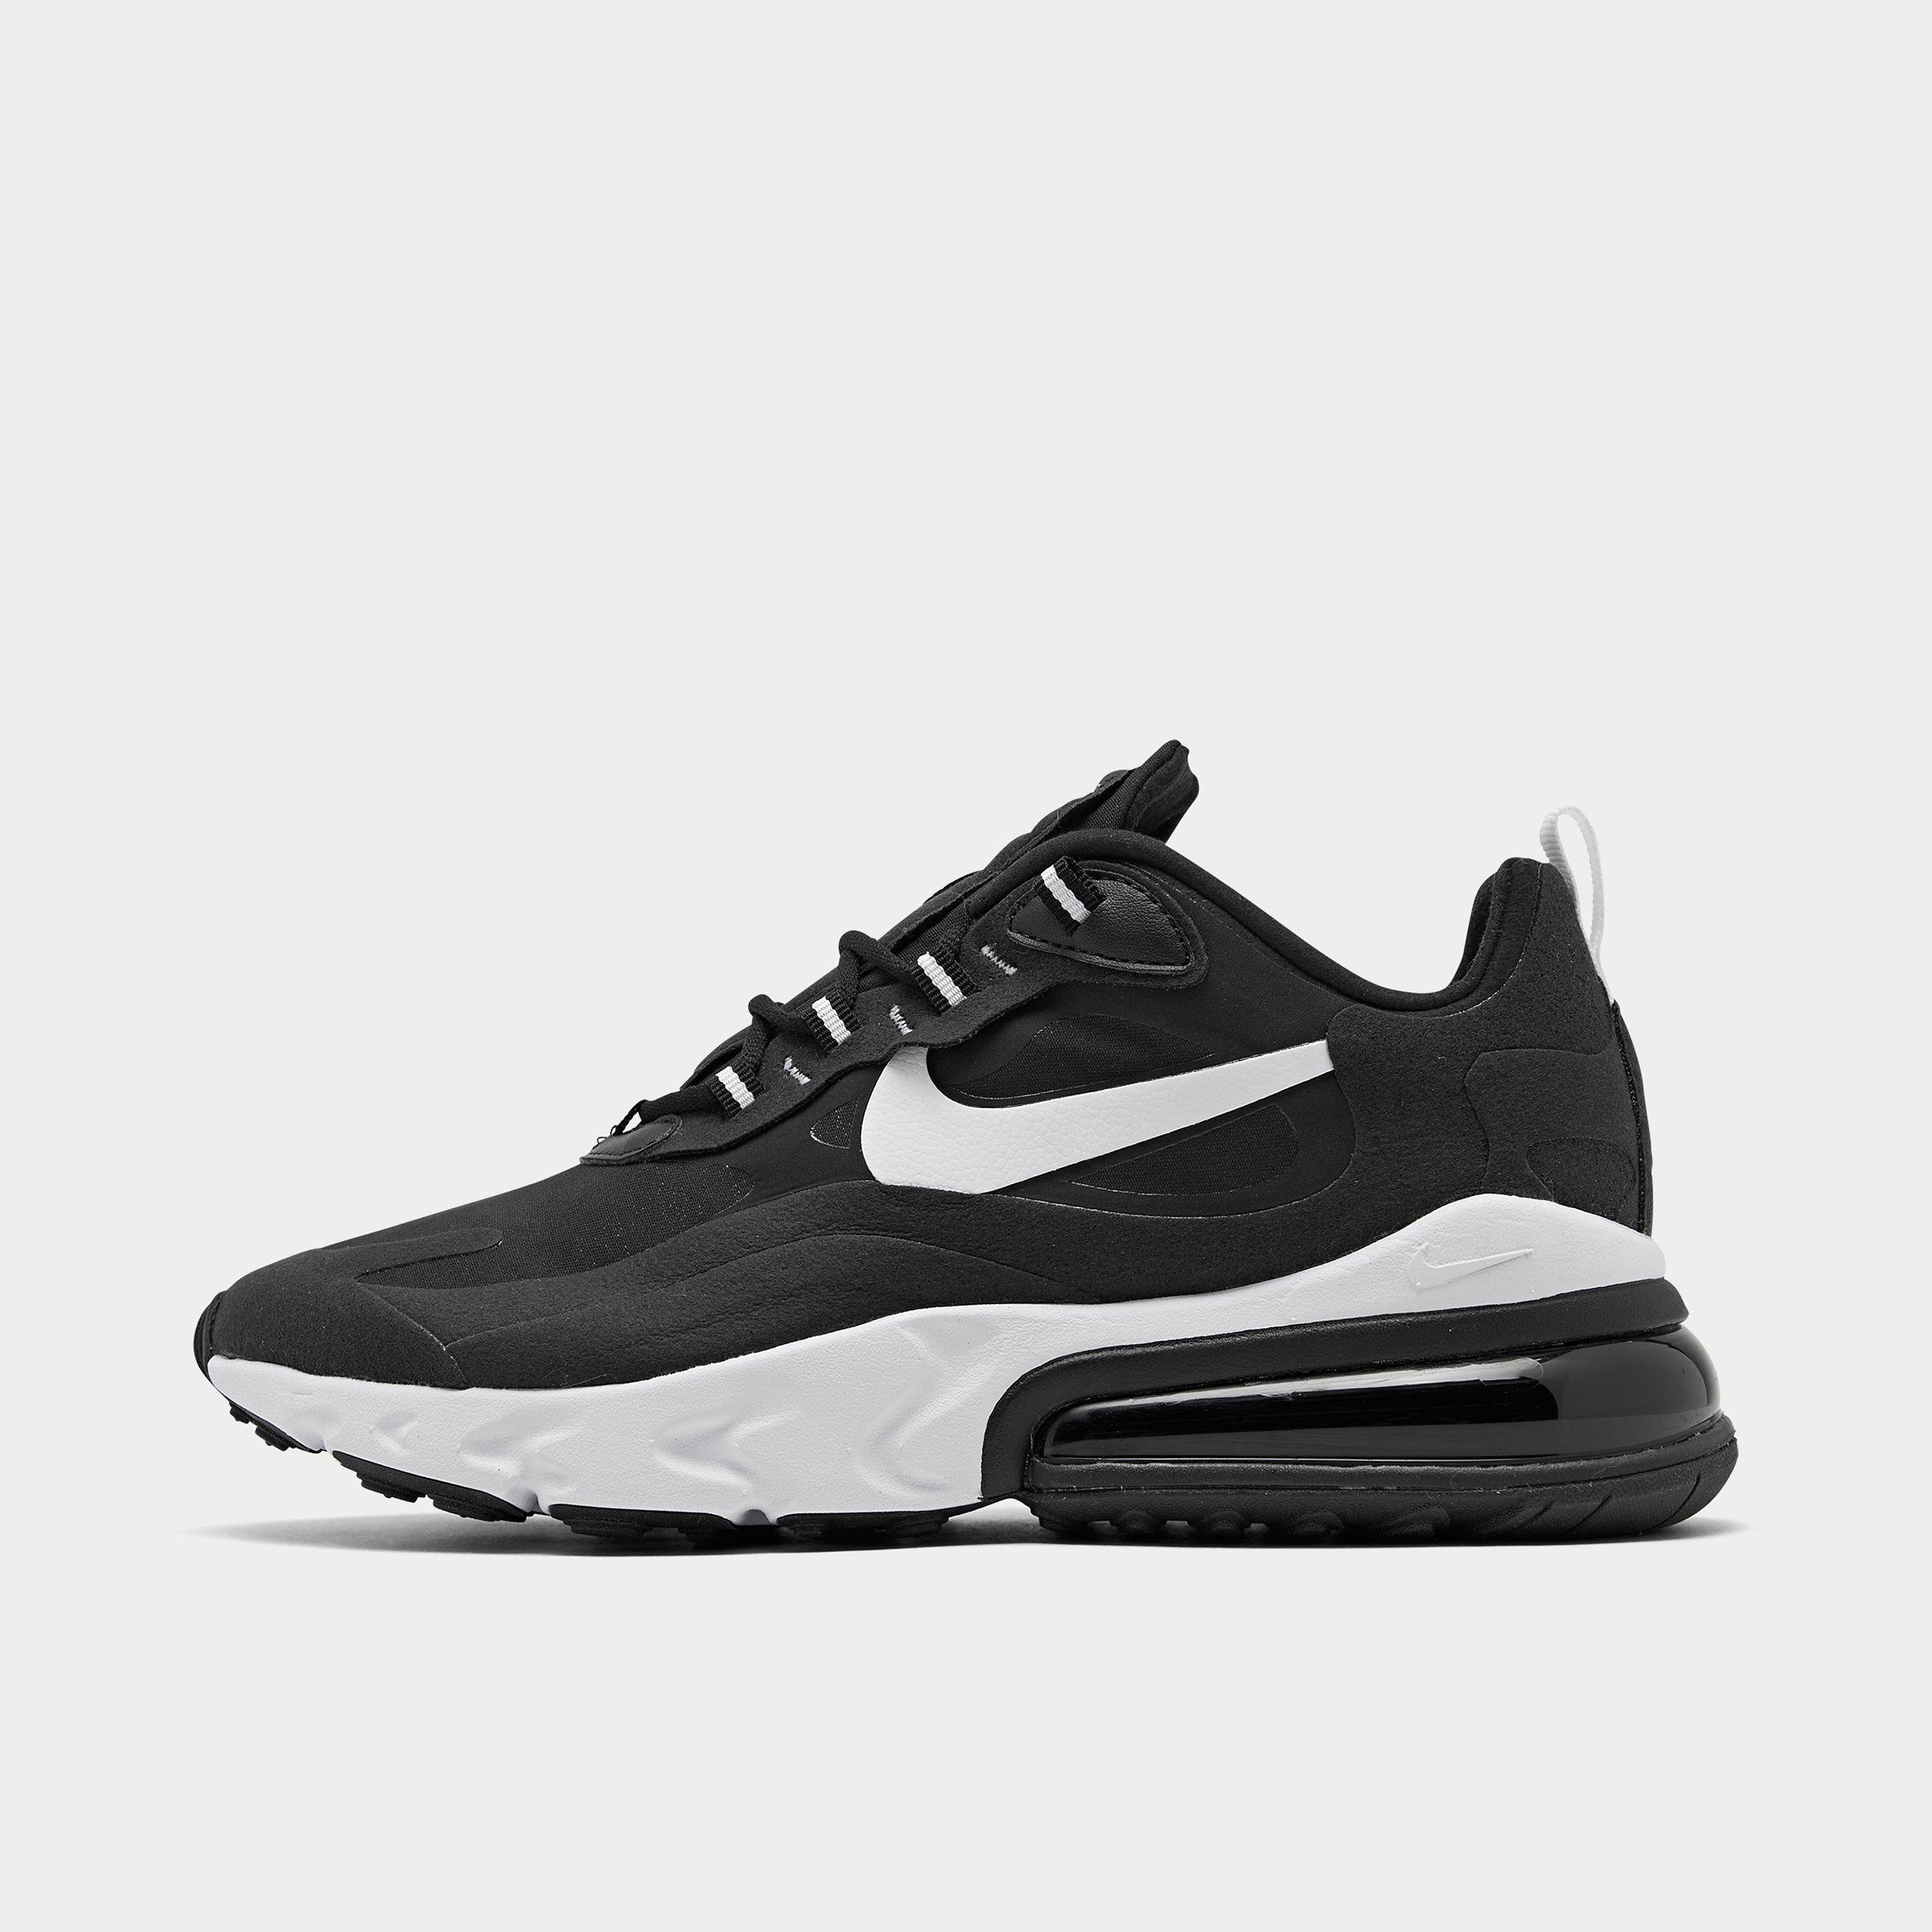 finish line air max for women